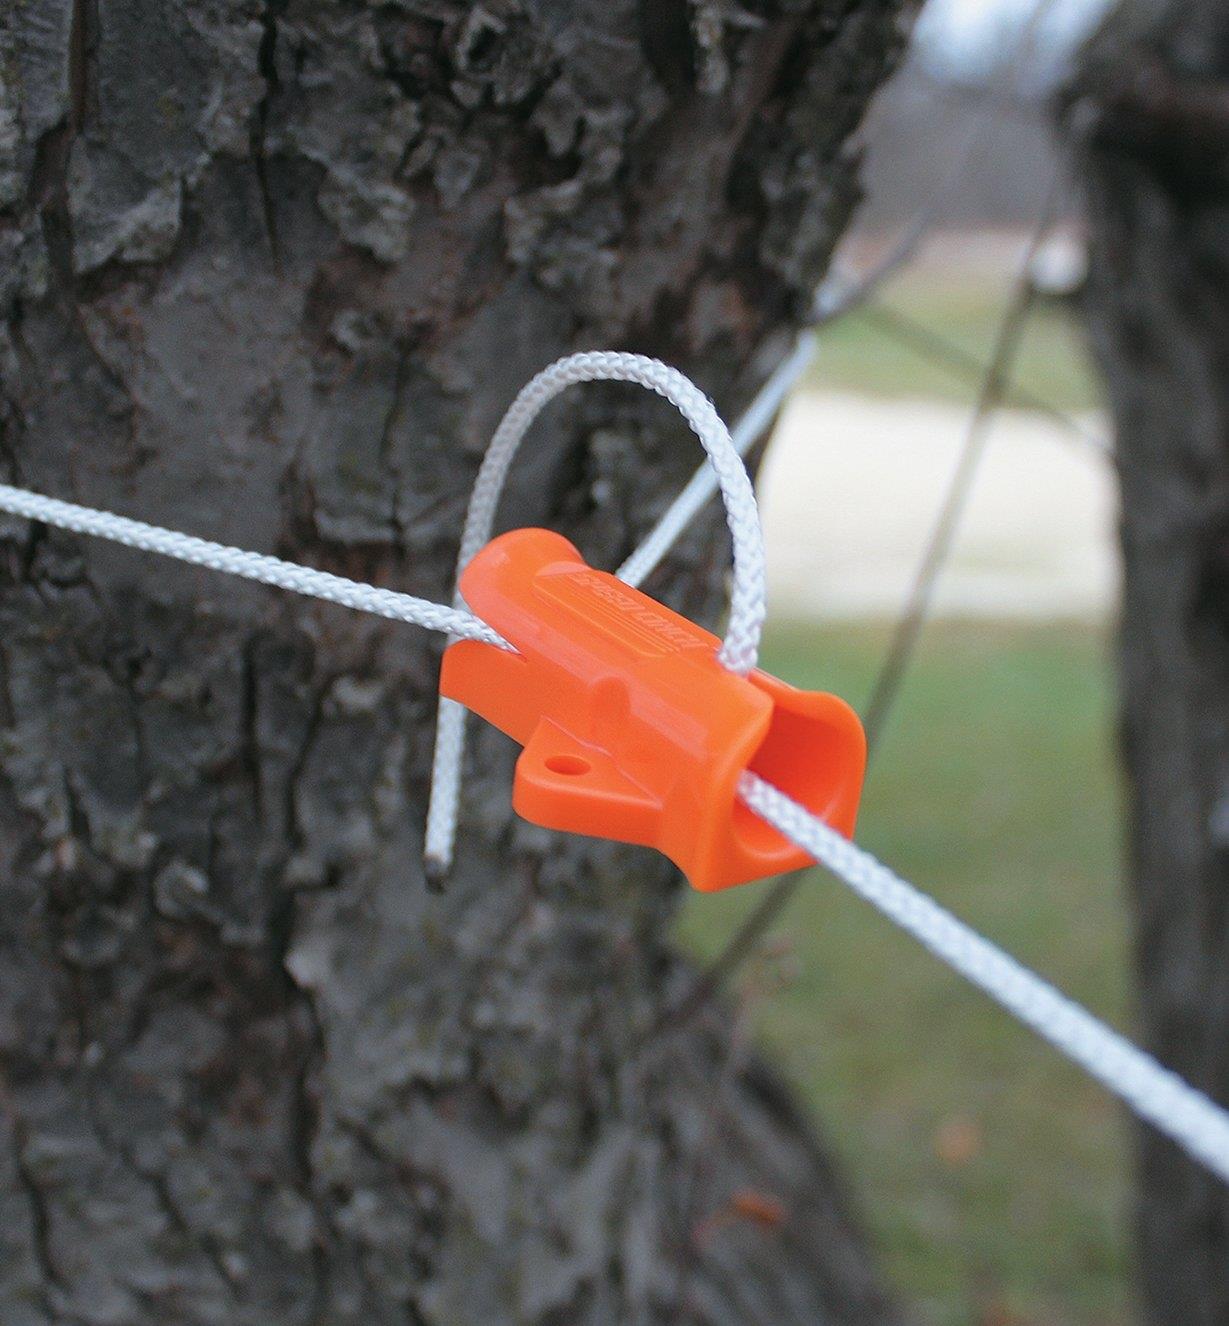 Speed Cinch Tie-Down Utility Cinch secures a rope to a tree